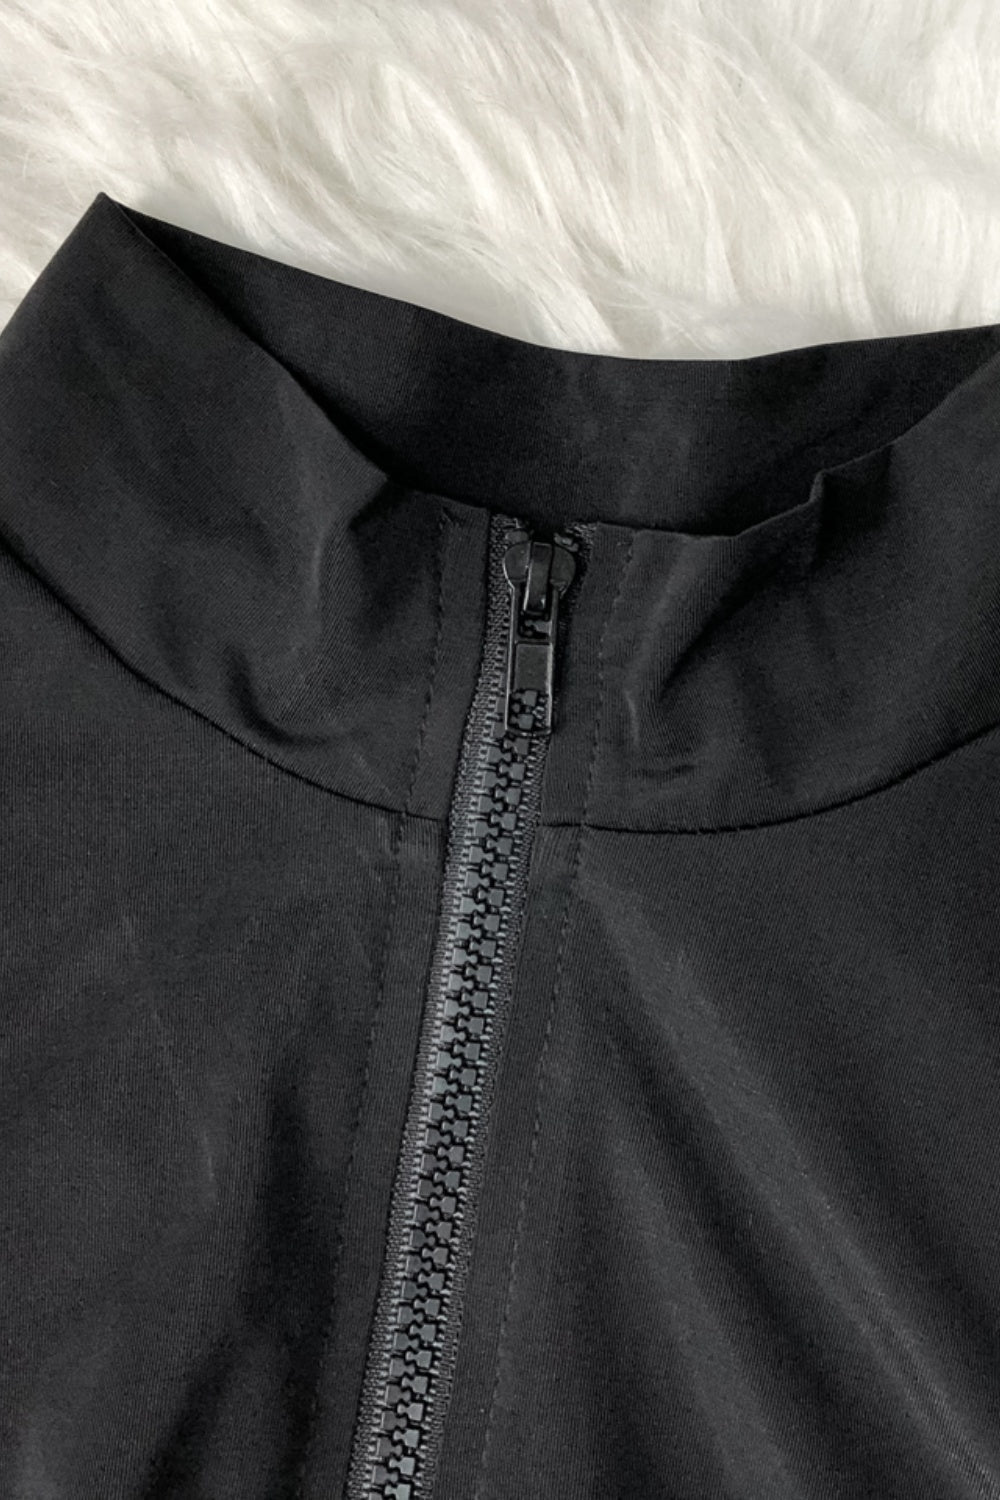 a close up of a black jacket with zippers